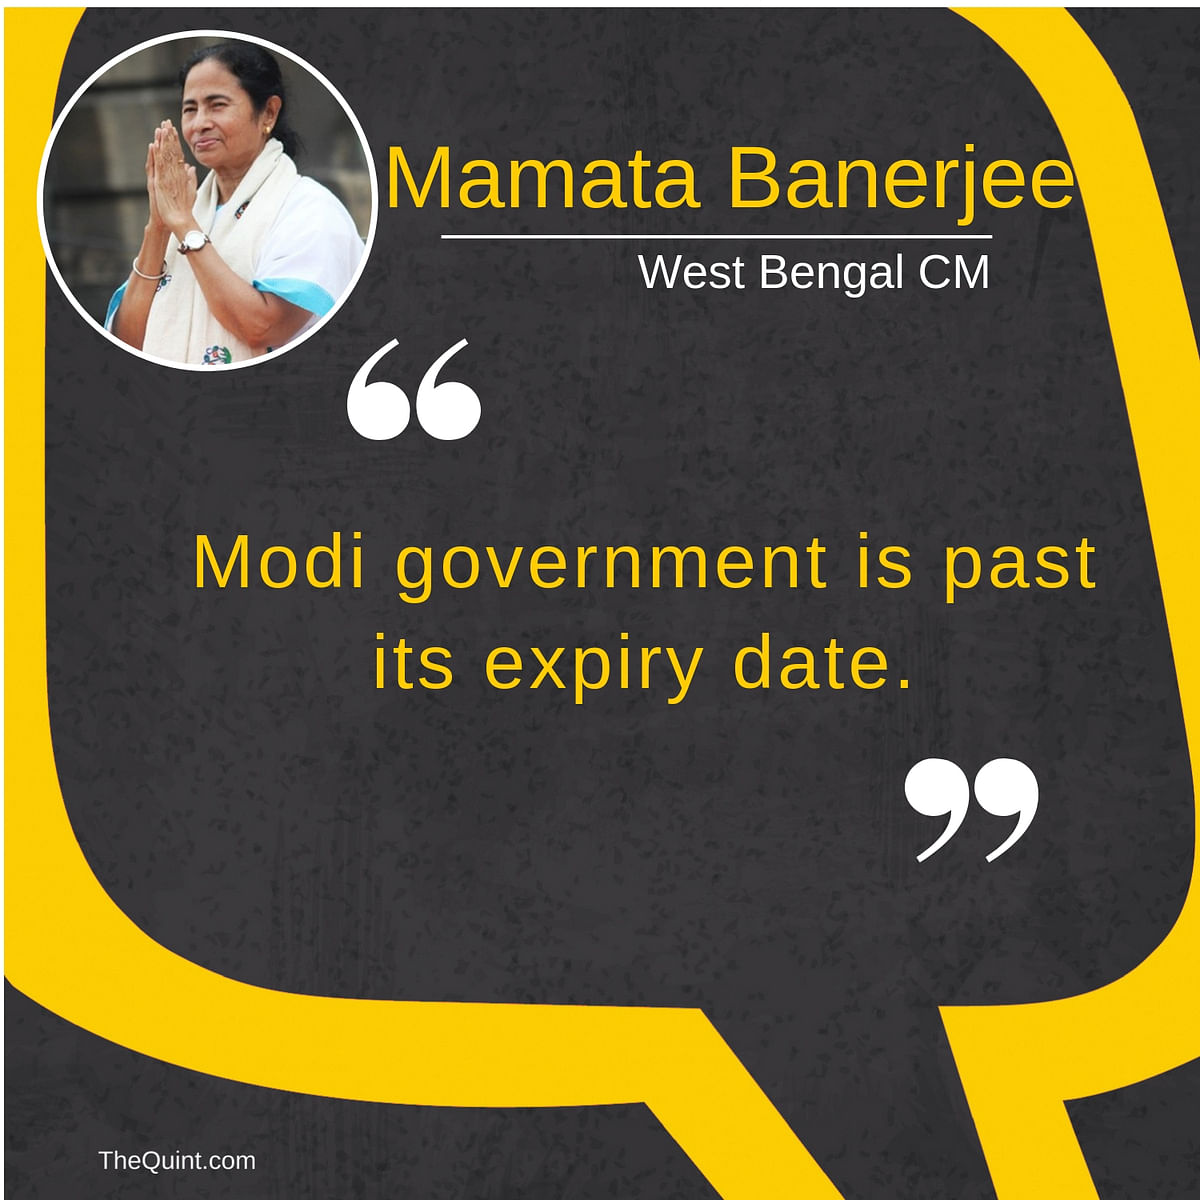 At the Kolkata Mega rally, Mamata said the BJP’s expiry date is over and it is time for a new govt at the Centre.